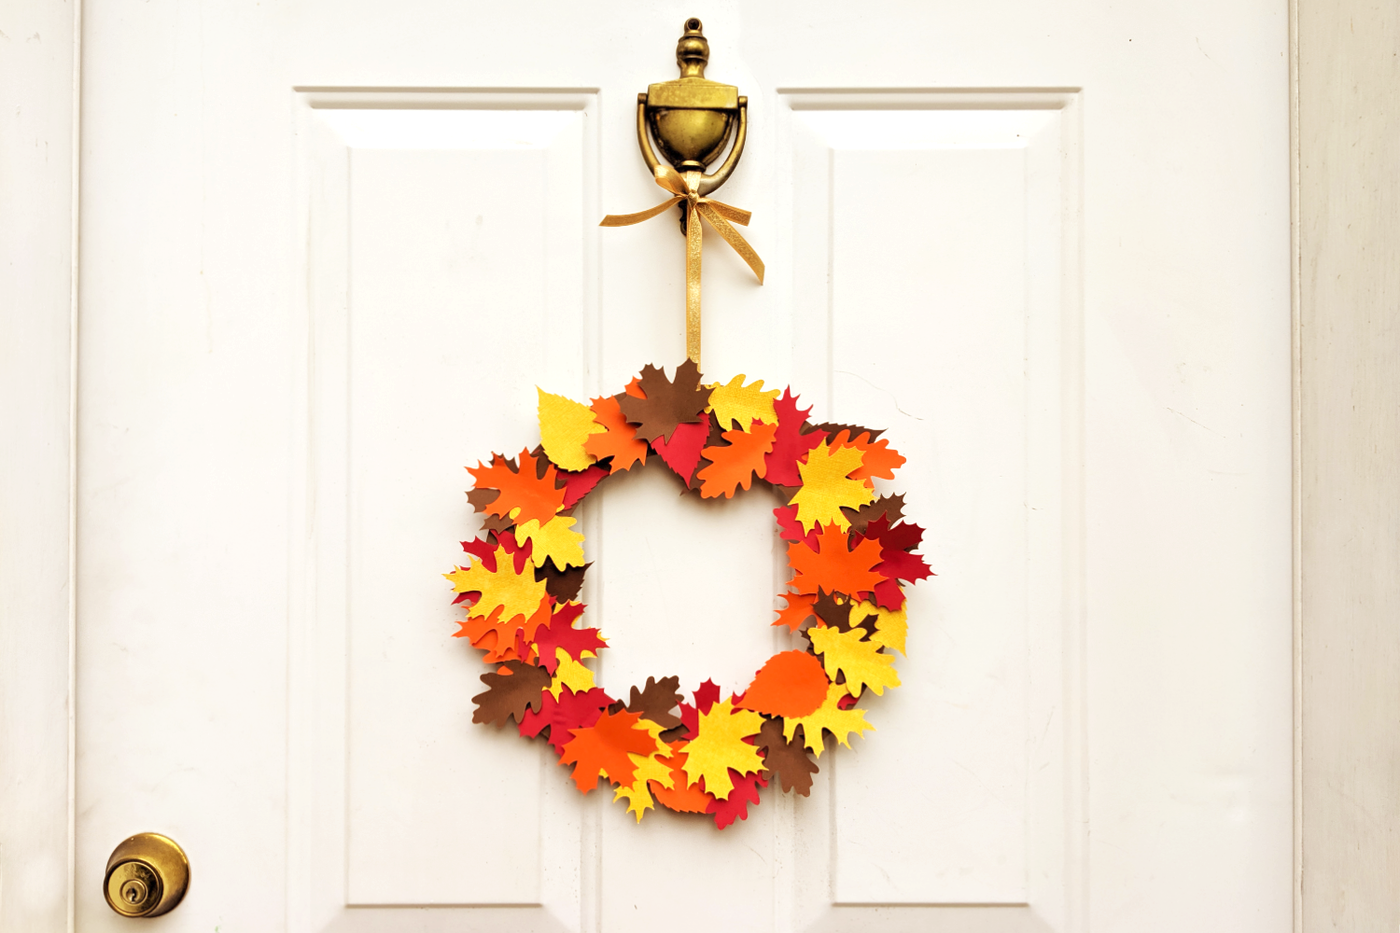 A wreath made of paper leaves in fall colors hangs on a white door with a brass knocker from a gold ribbon.